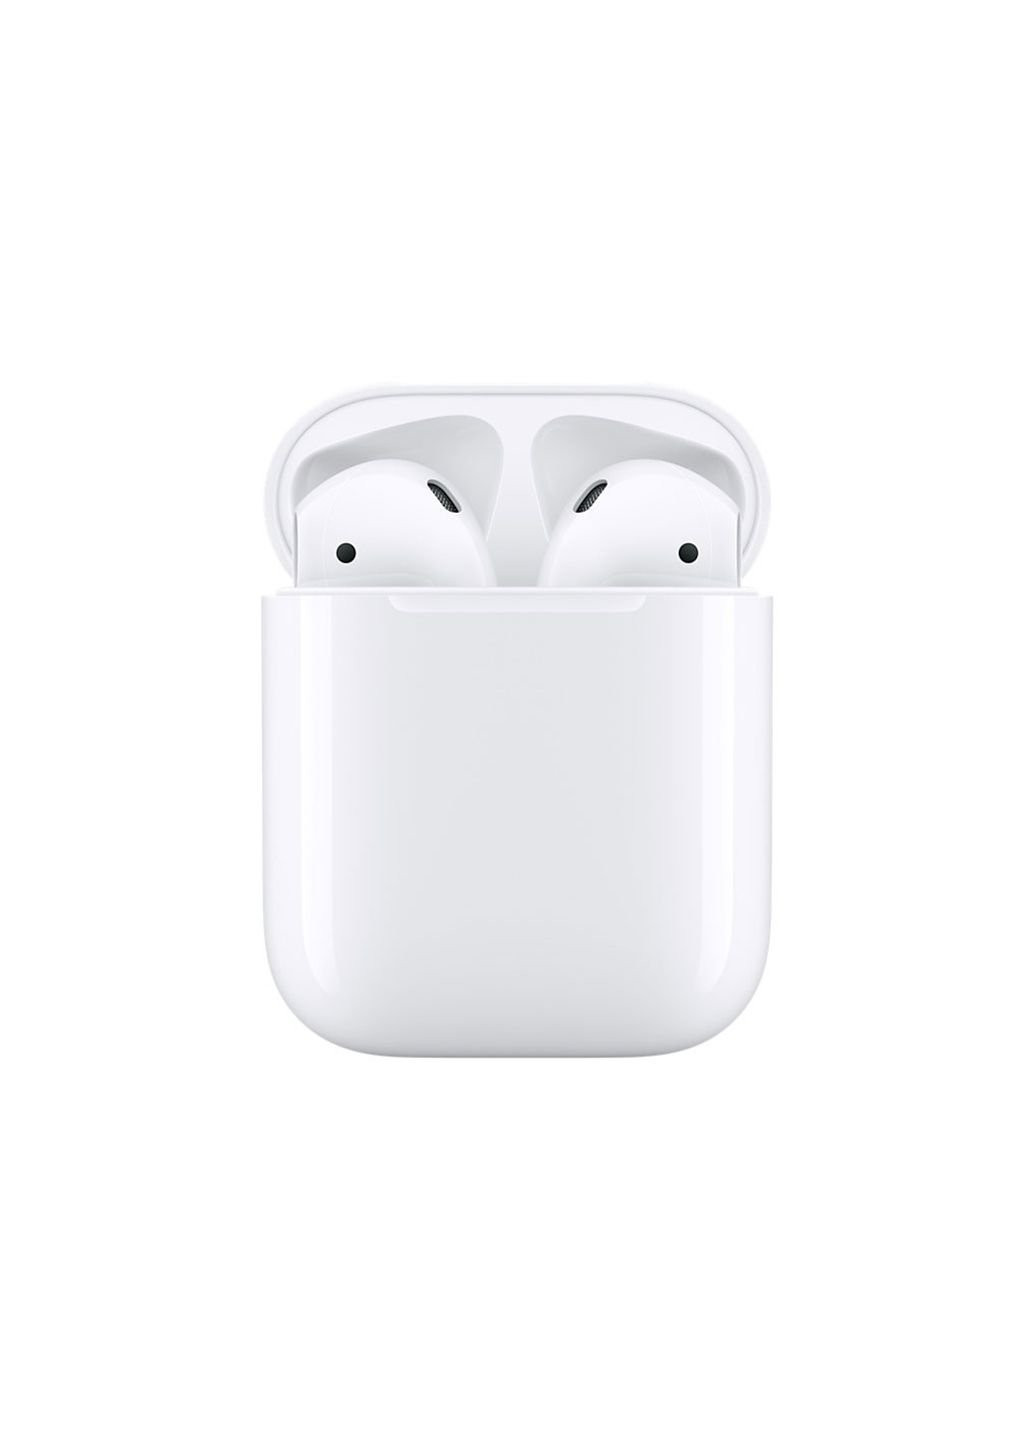 Наушники (MV7N2TY/A) Apple airpods with charging case (253547444)